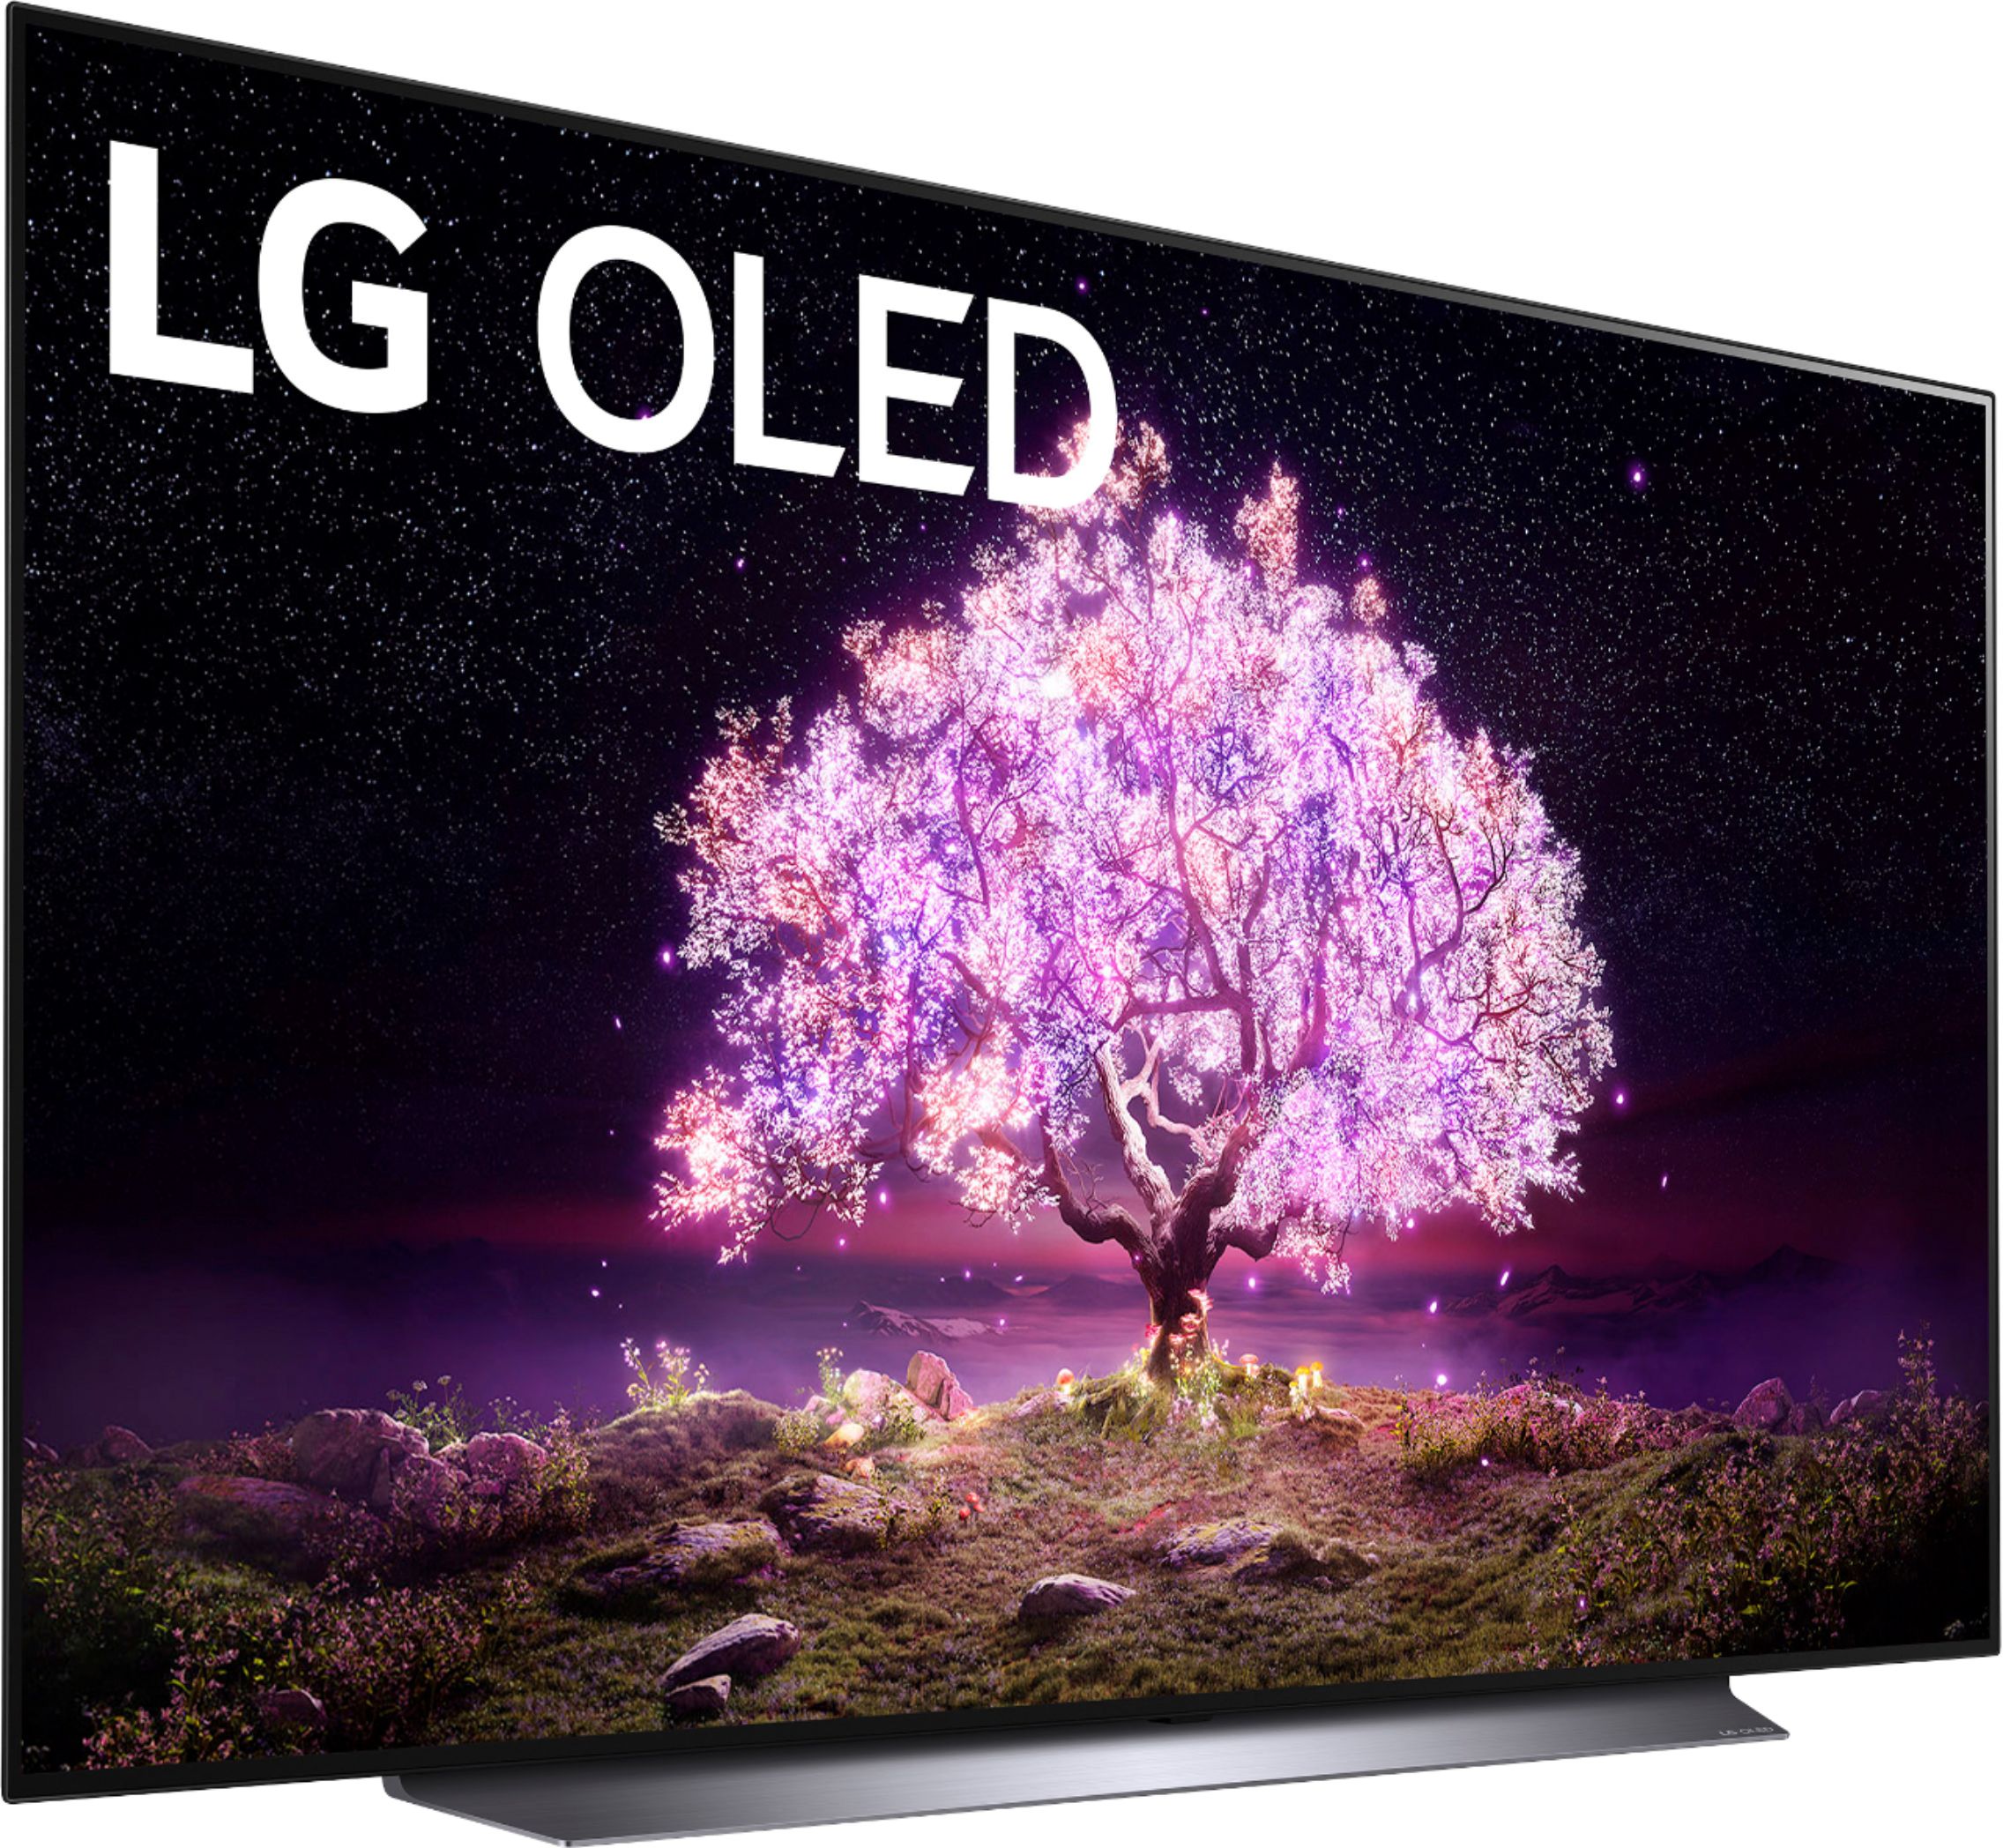 LG C1 Gets New Game Dashboard + CX to Get 4K 120Hz Dolby Vision